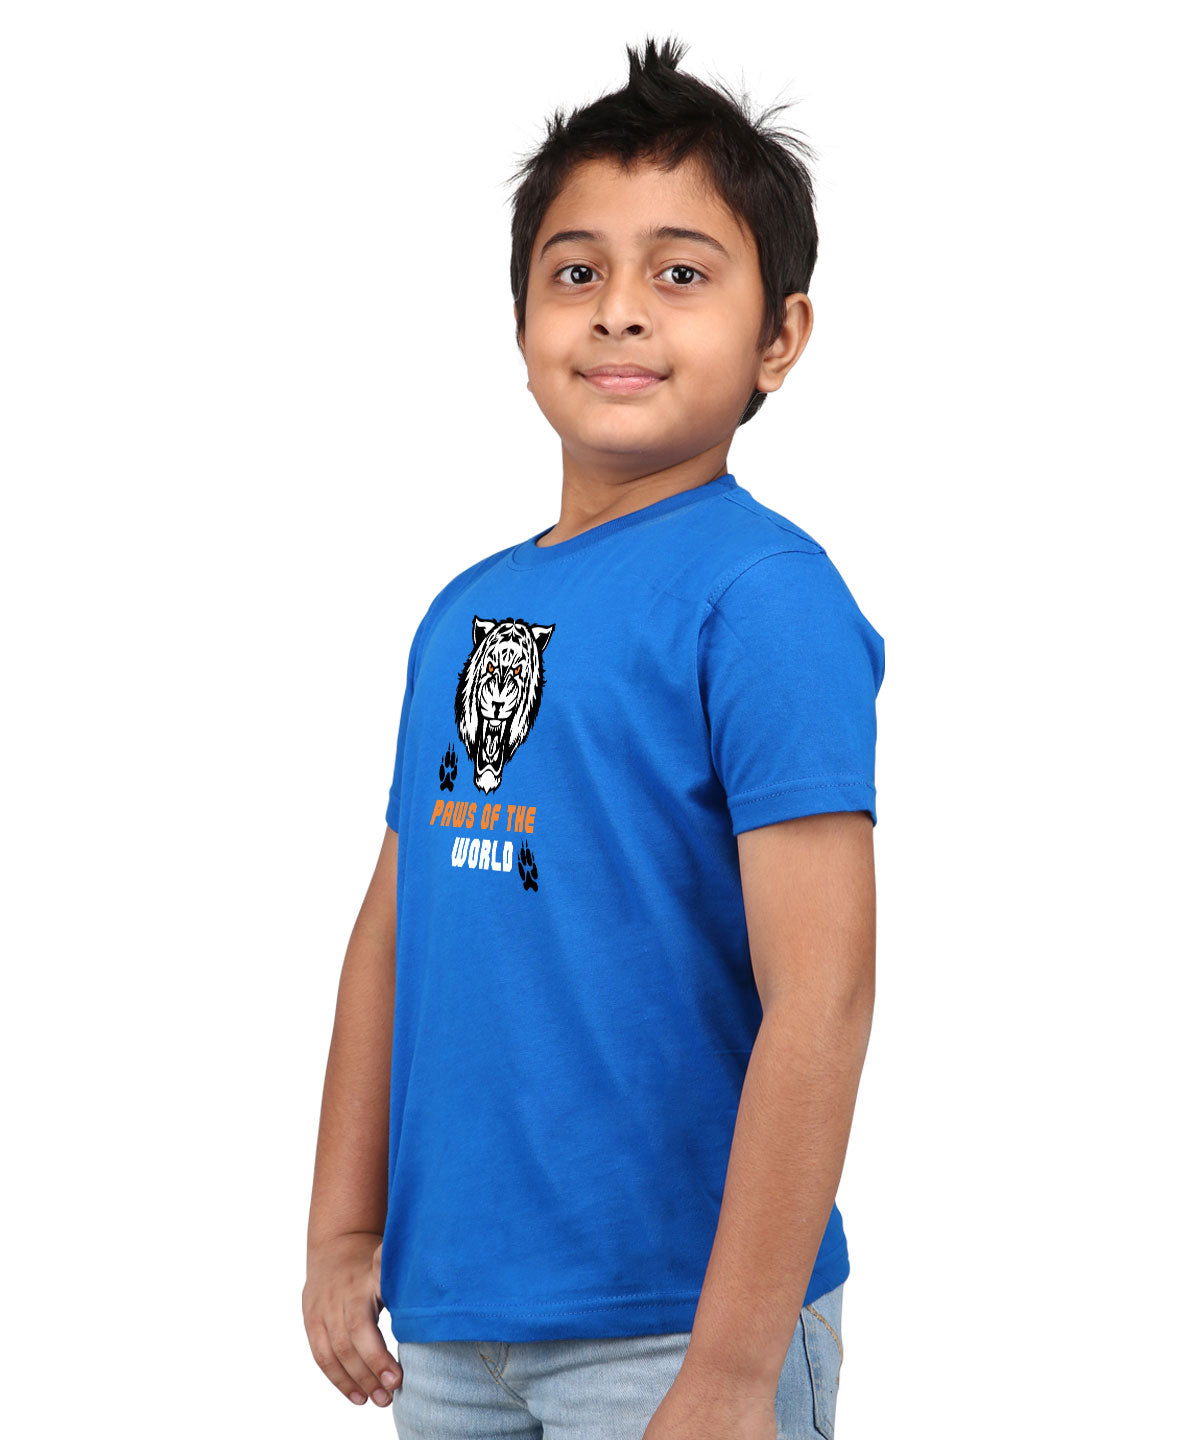 Paws Of the World - Premium Round Neck Cotton Tees for Juniors - Electric Blue